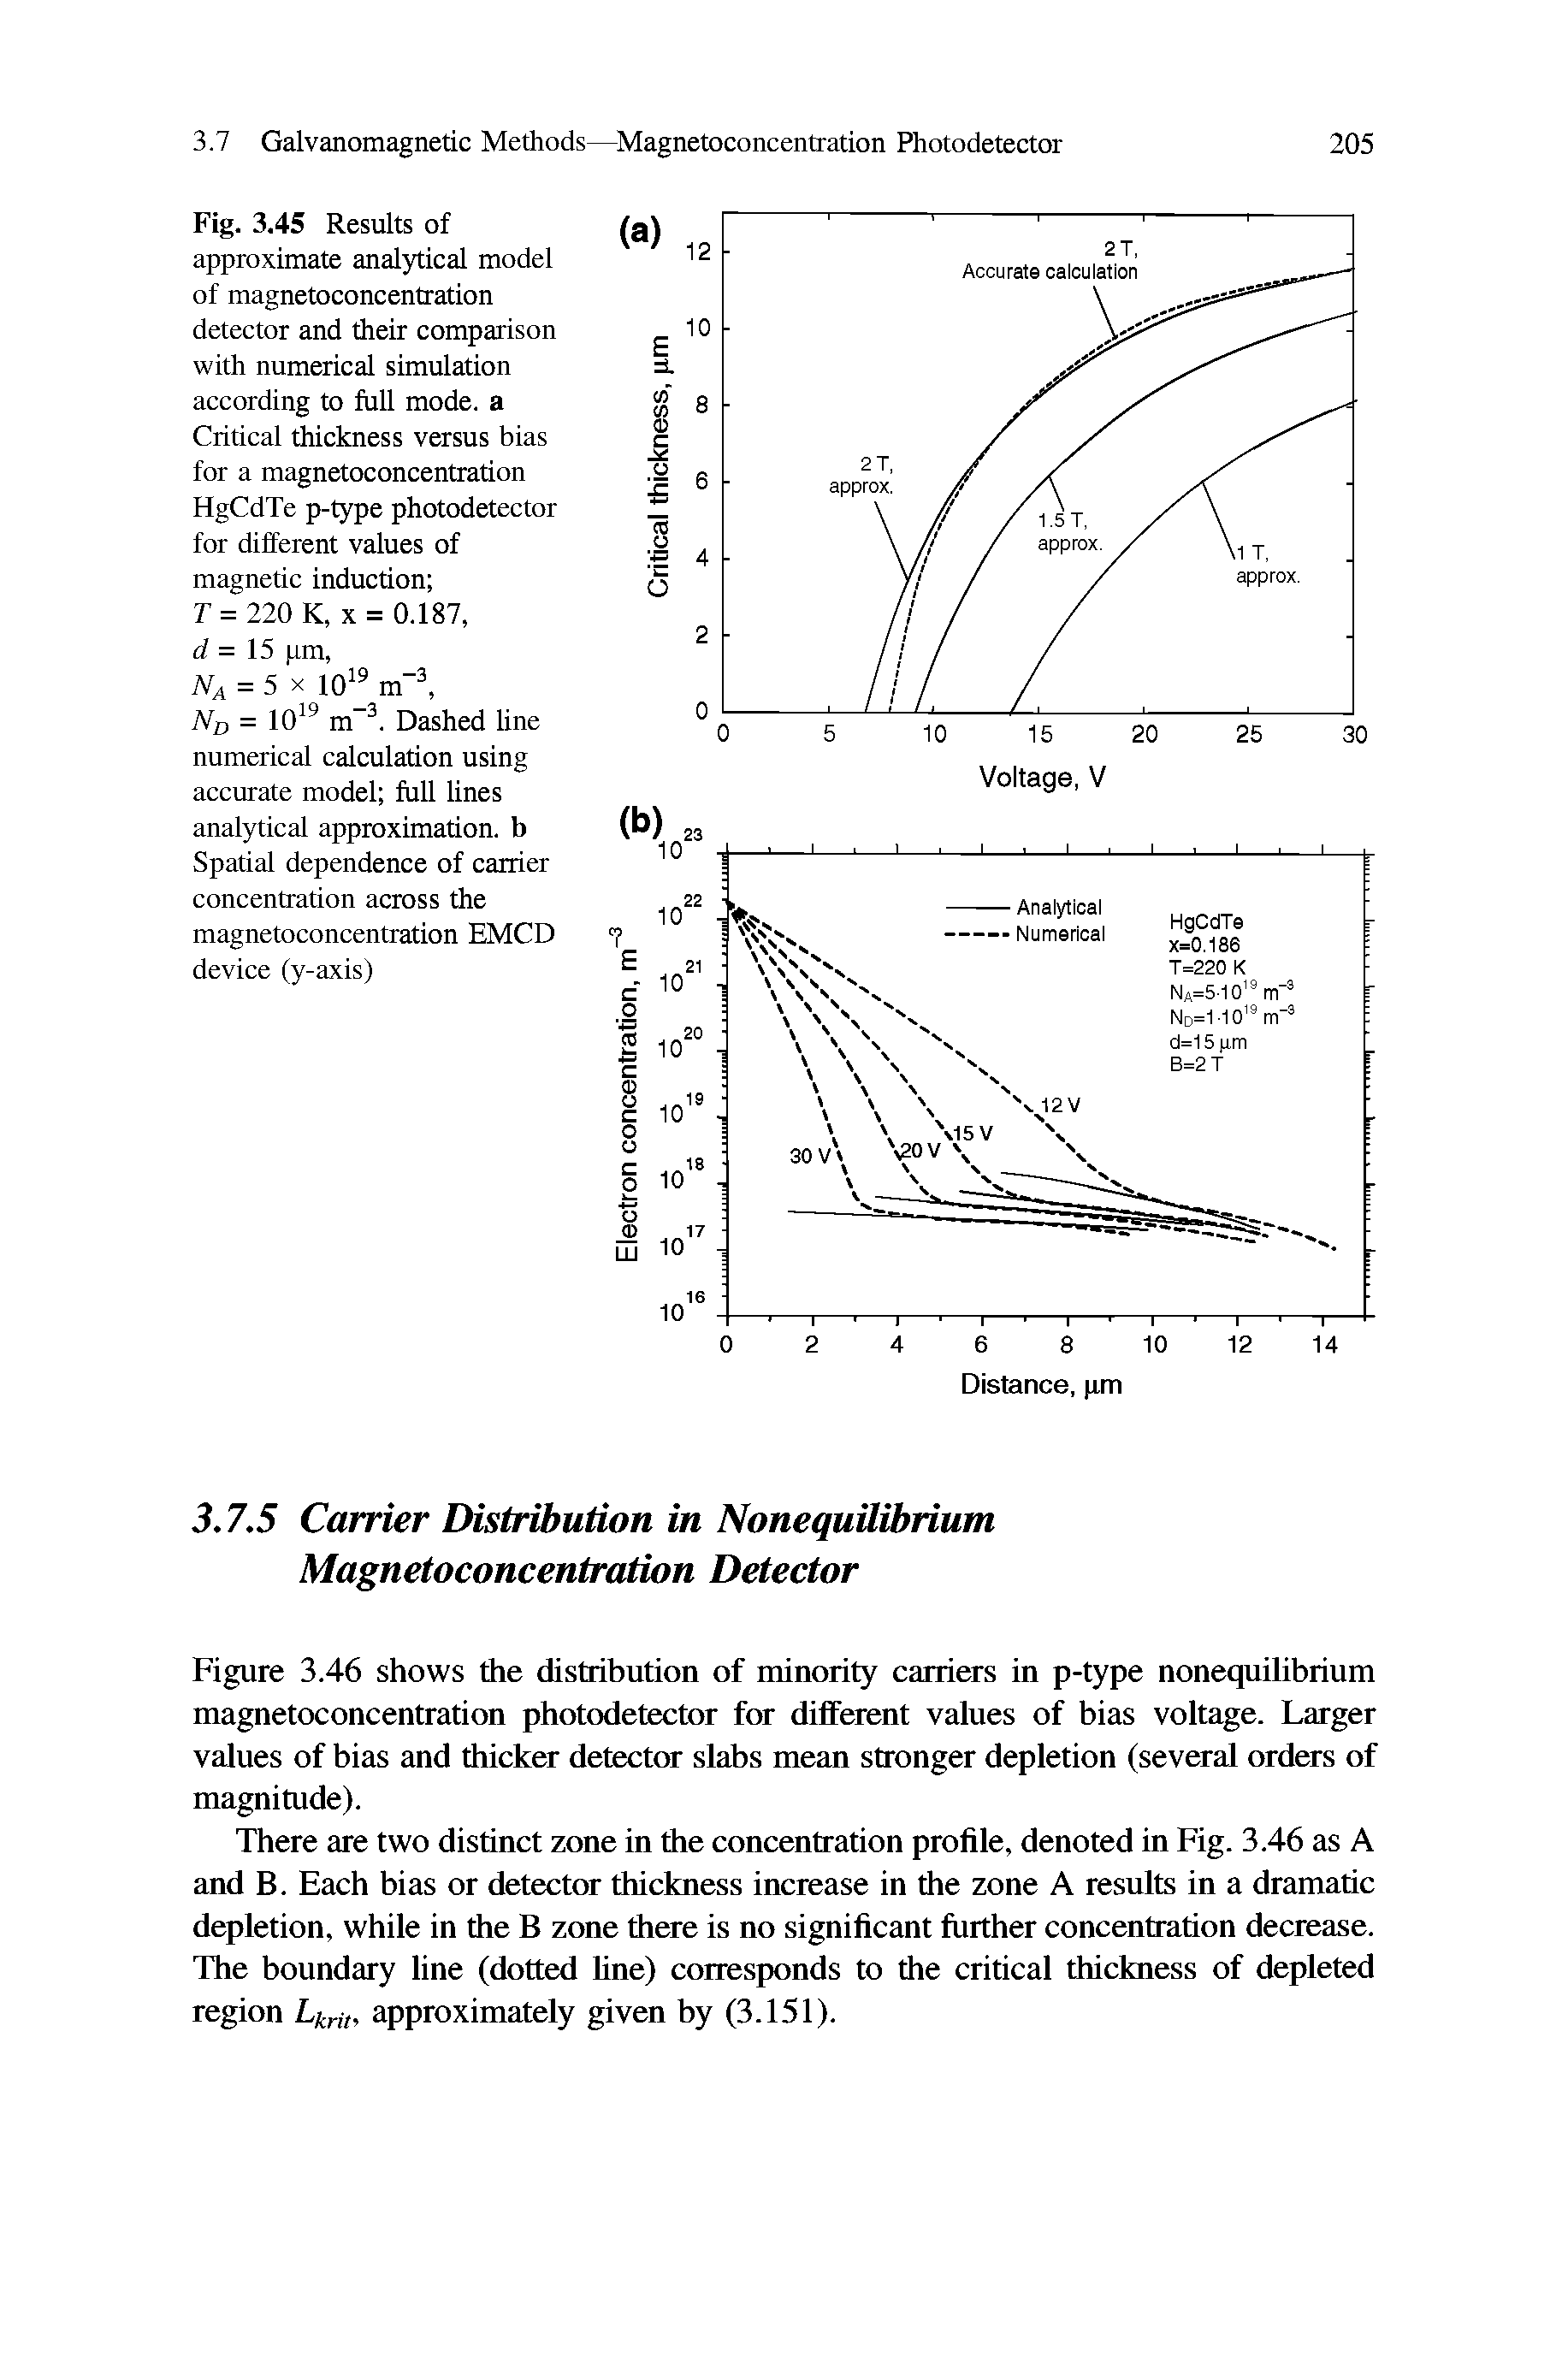 Fig. 3.45 Results of approximate analytical model of magnetoconcentration detector and their comparison with numerical simulation according to full mode, a Critical thickness versus bias for a magnetoconcentration HgCdTe p-type photodetector for different values of magnetic induction r = 220 K, X = 0.187, d = 15 pm,...